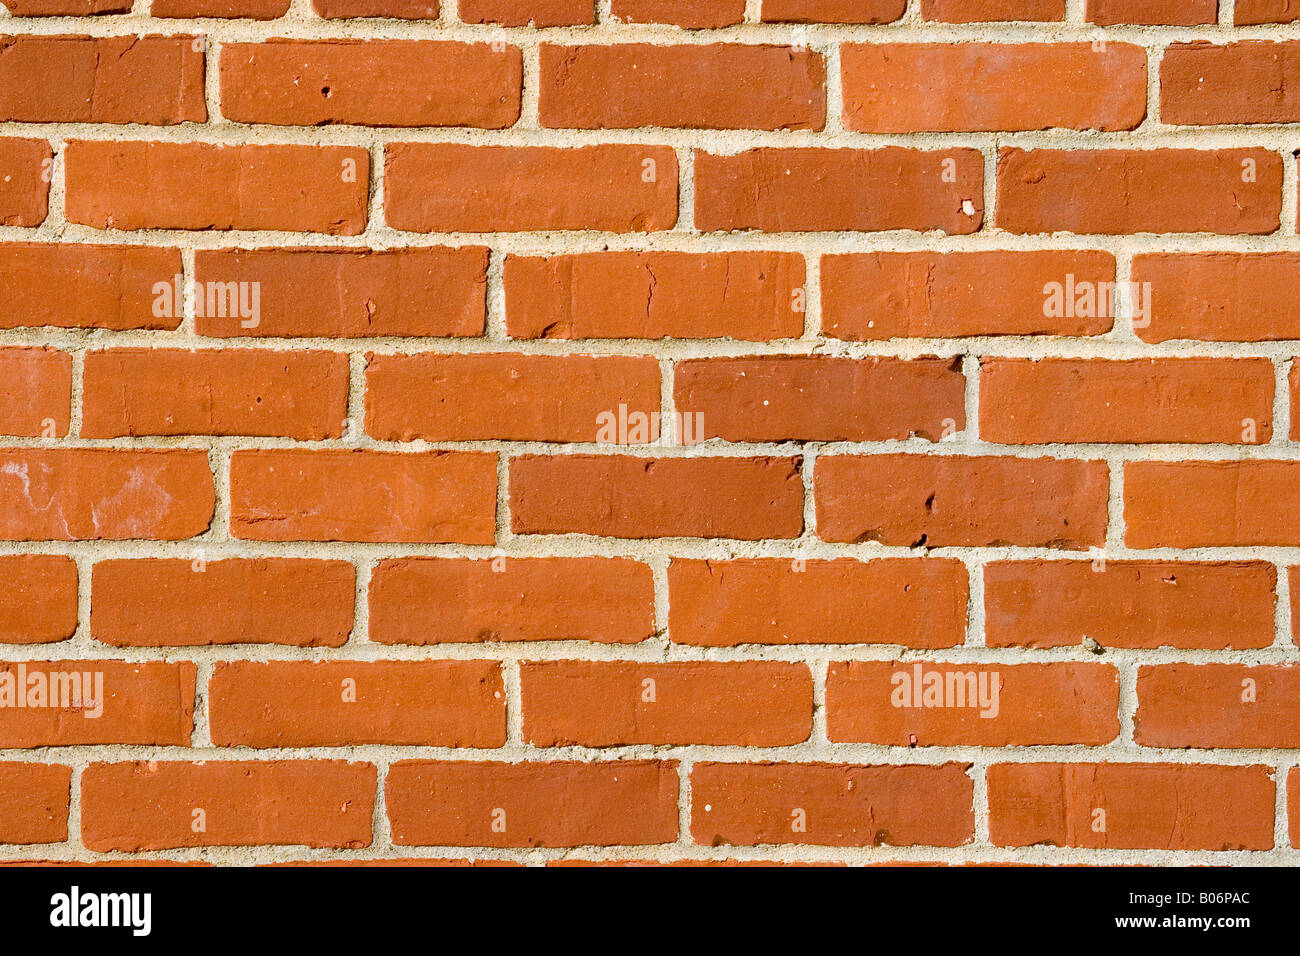 Brick wall background, may be used as a red background. Stock Photo